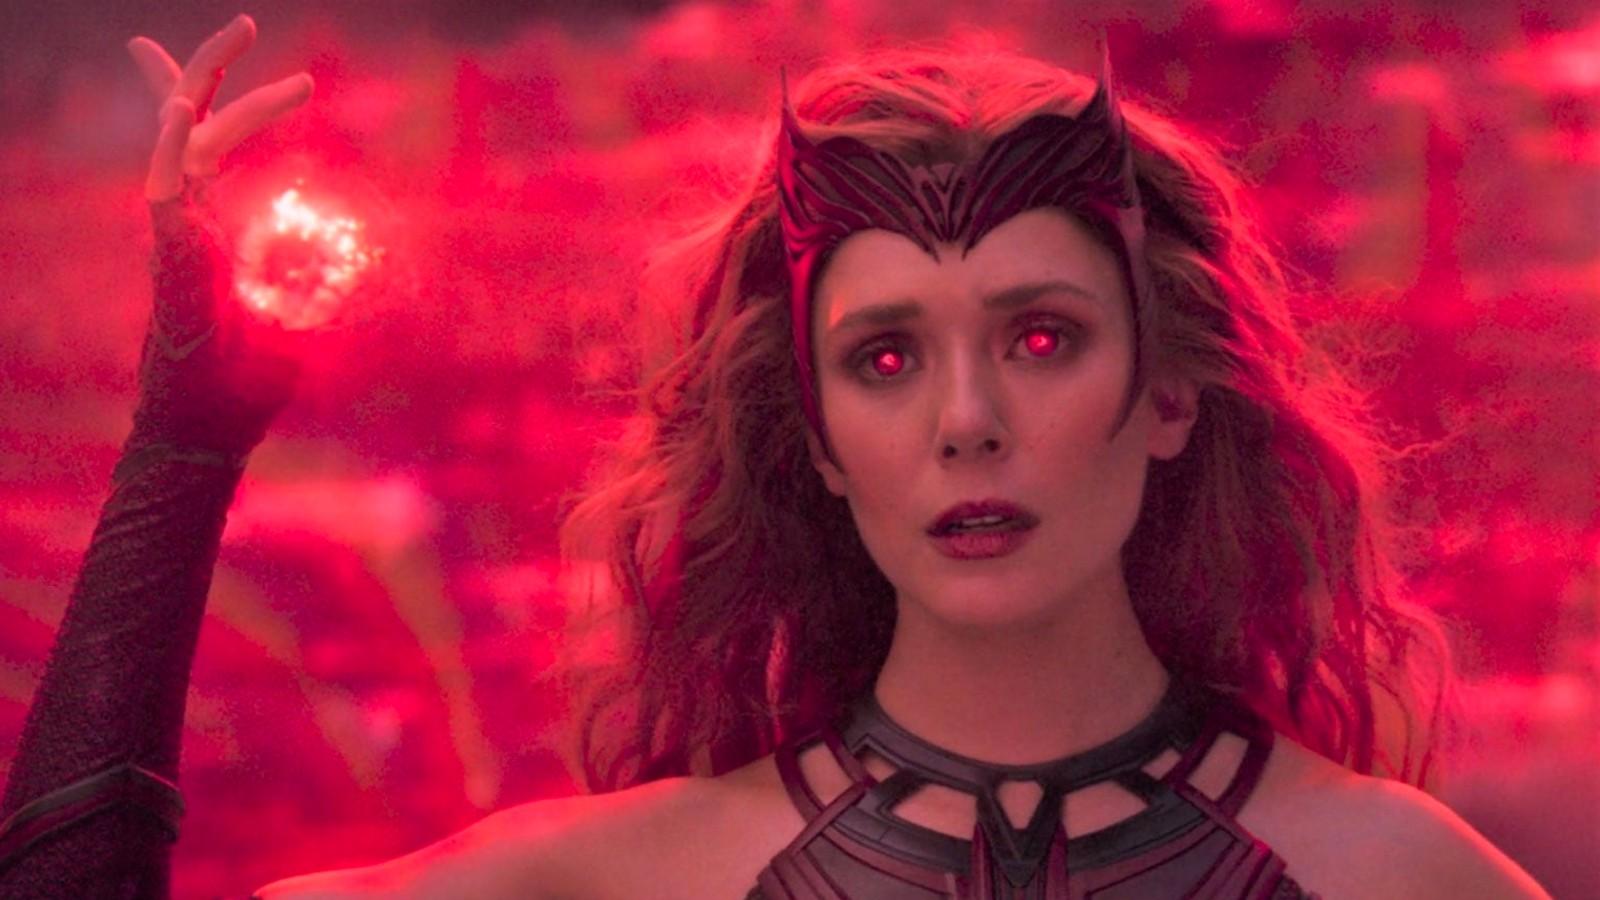 Scarlet Witch in the MCU